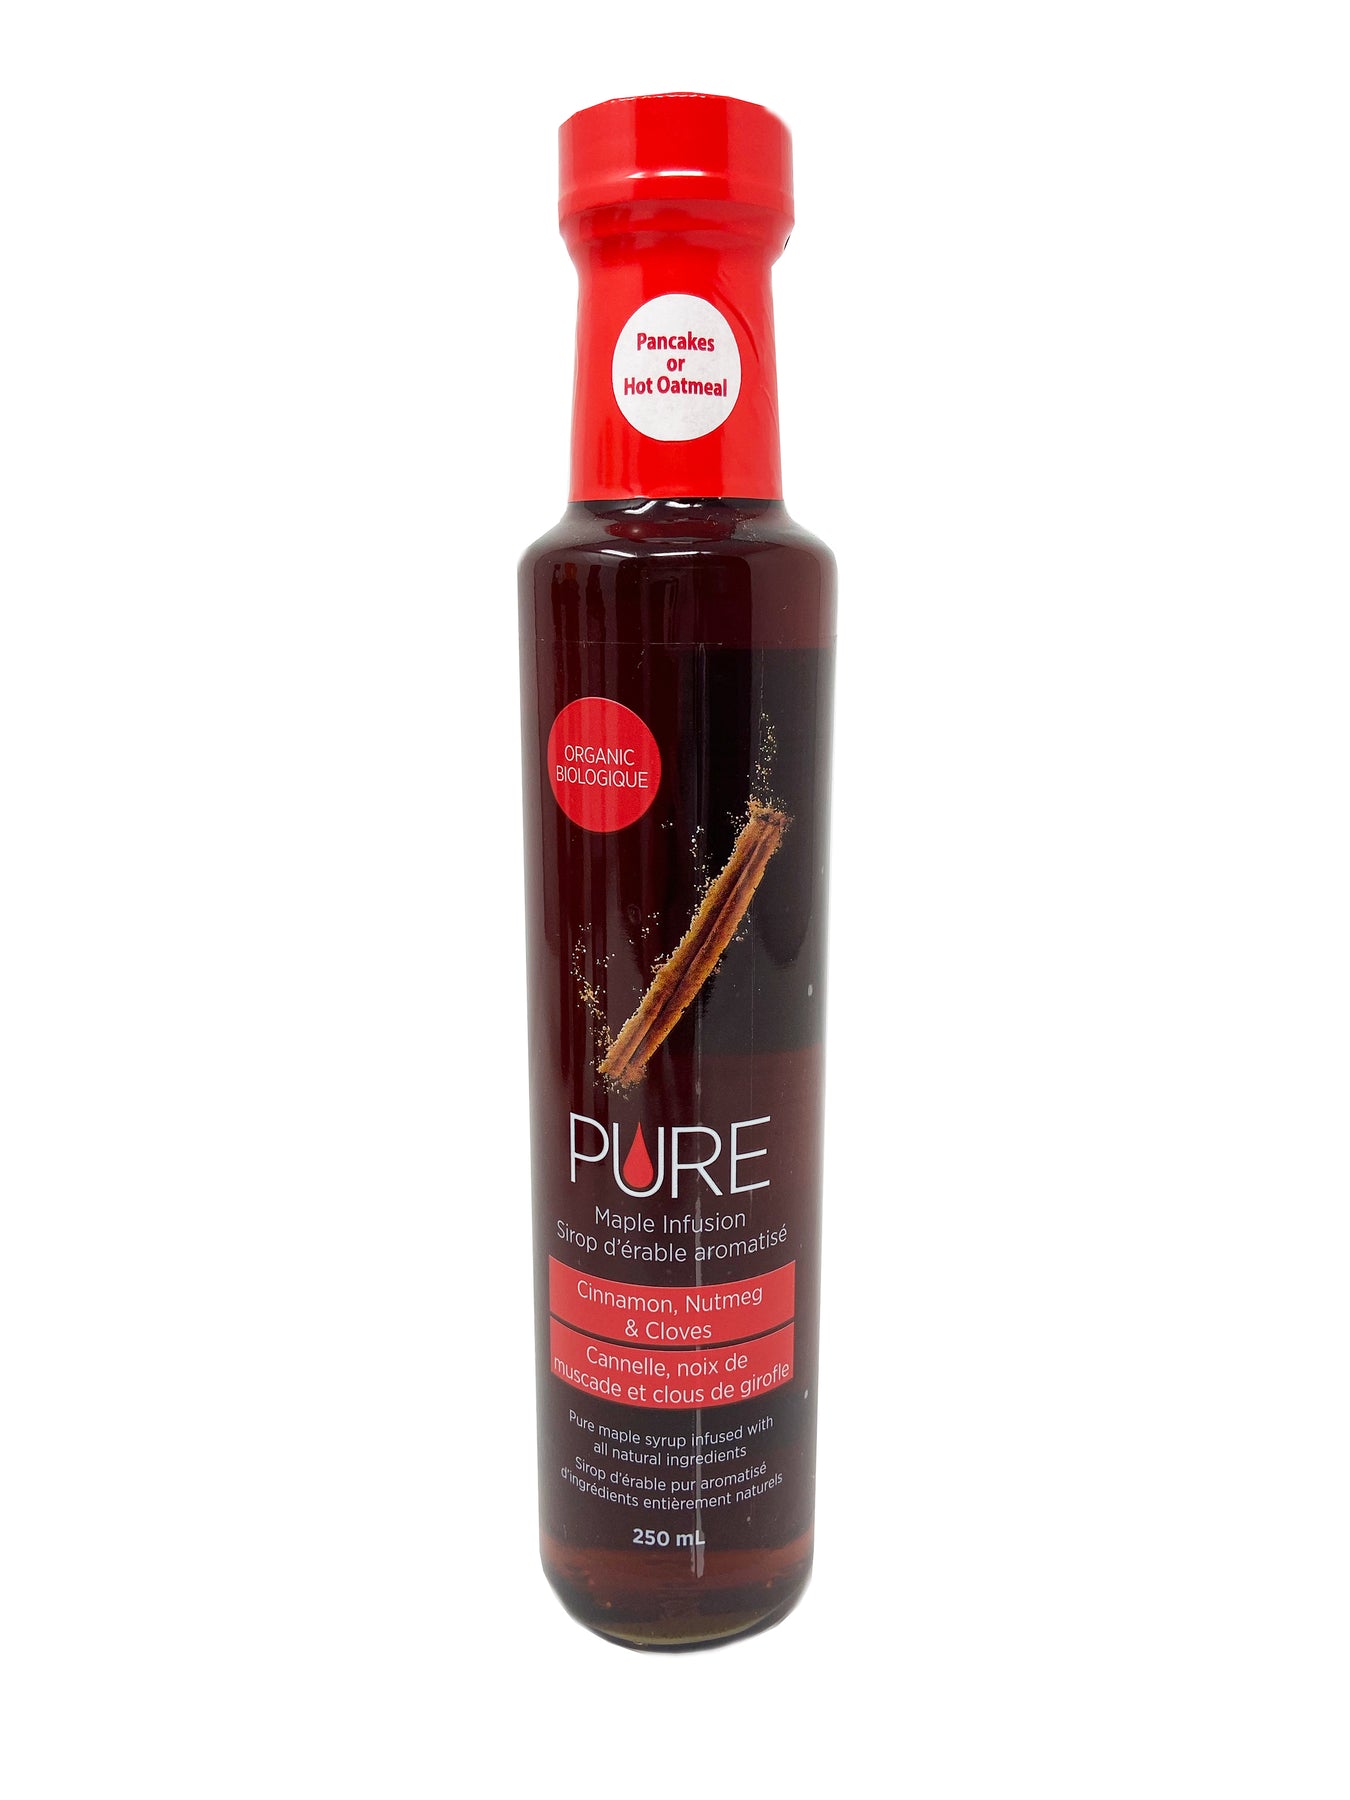 PURE Infused Maple Syrups